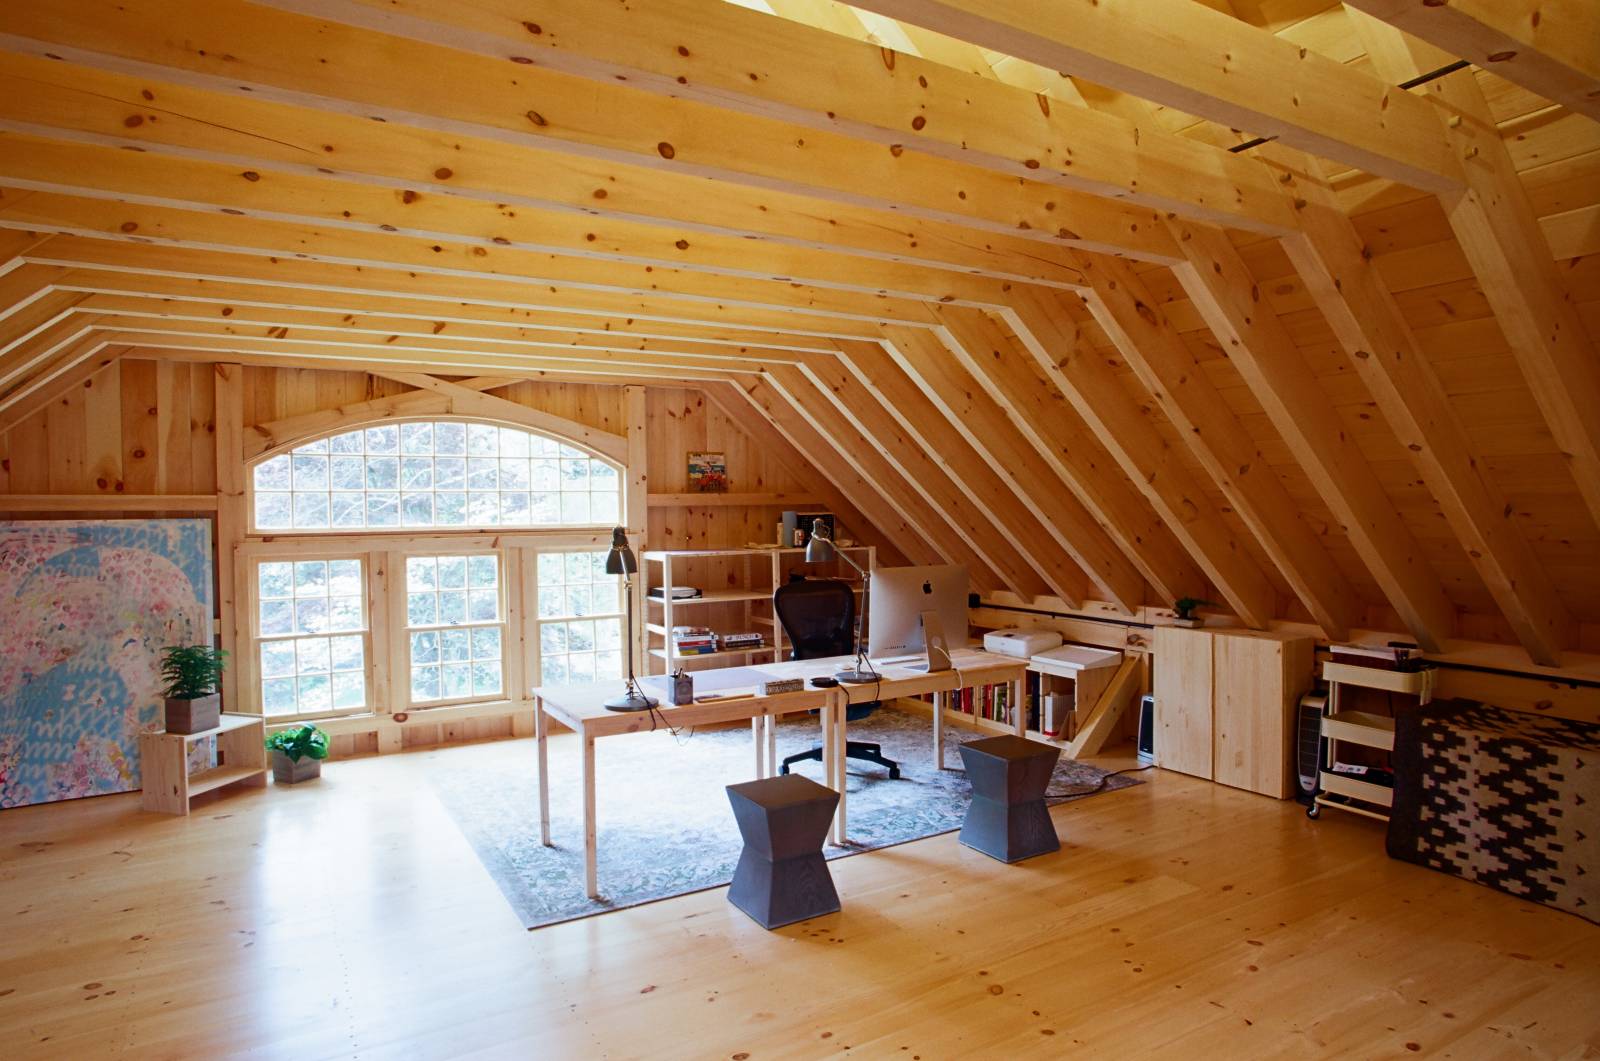 This post & beam barn interior is an inspiring space. Could you work here?